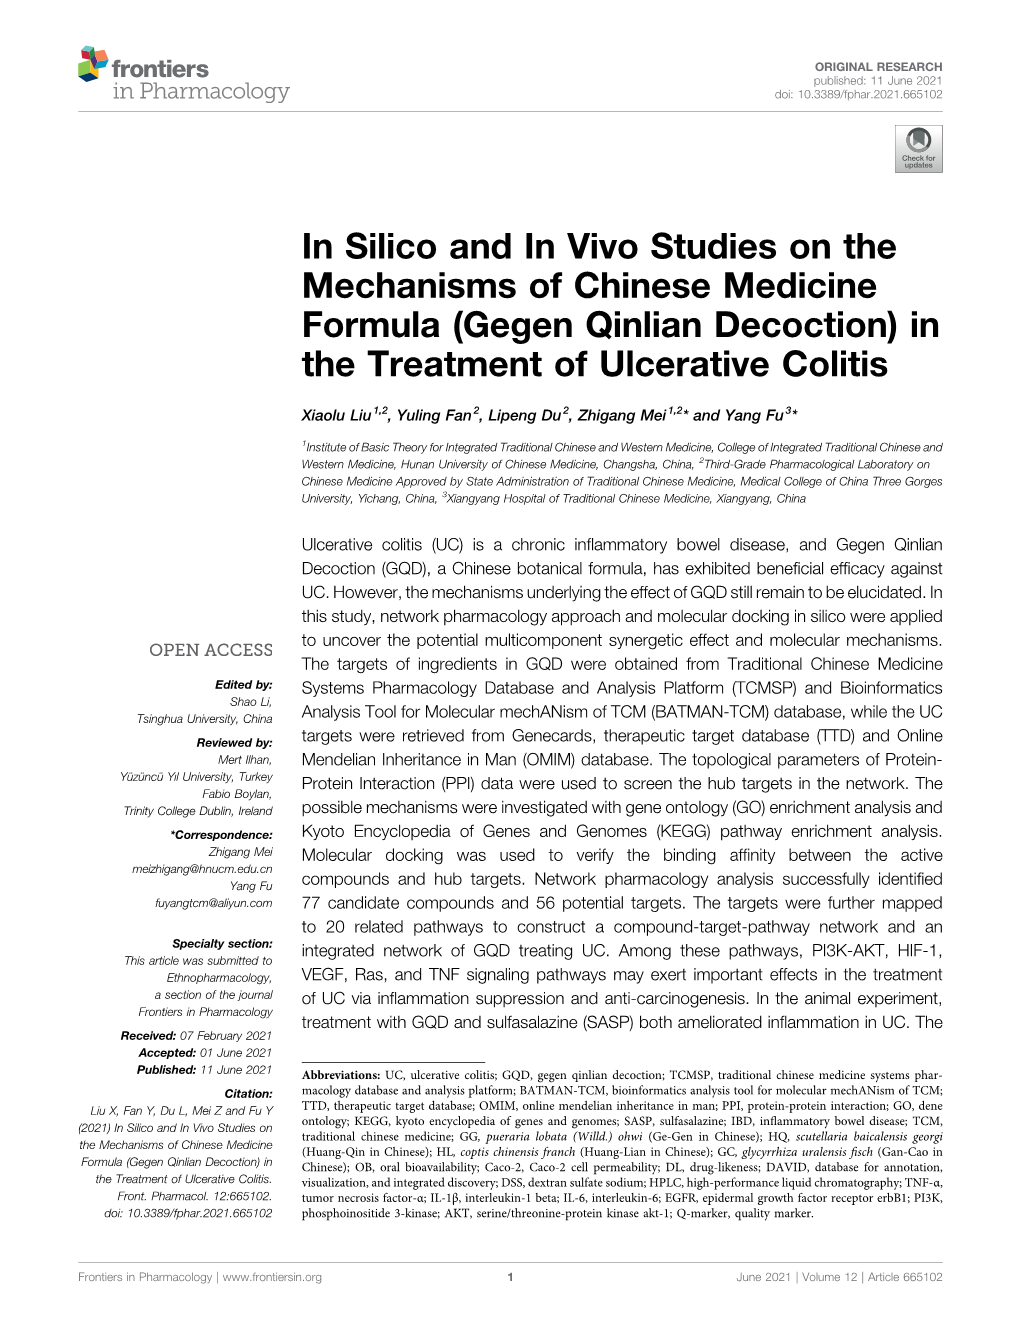 In Silico and in Vivo Studies on the Mechanisms of Chinese Medicine Formula (Gegen Qinlian Decoction) in the Treatment of Ulcerative Colitis